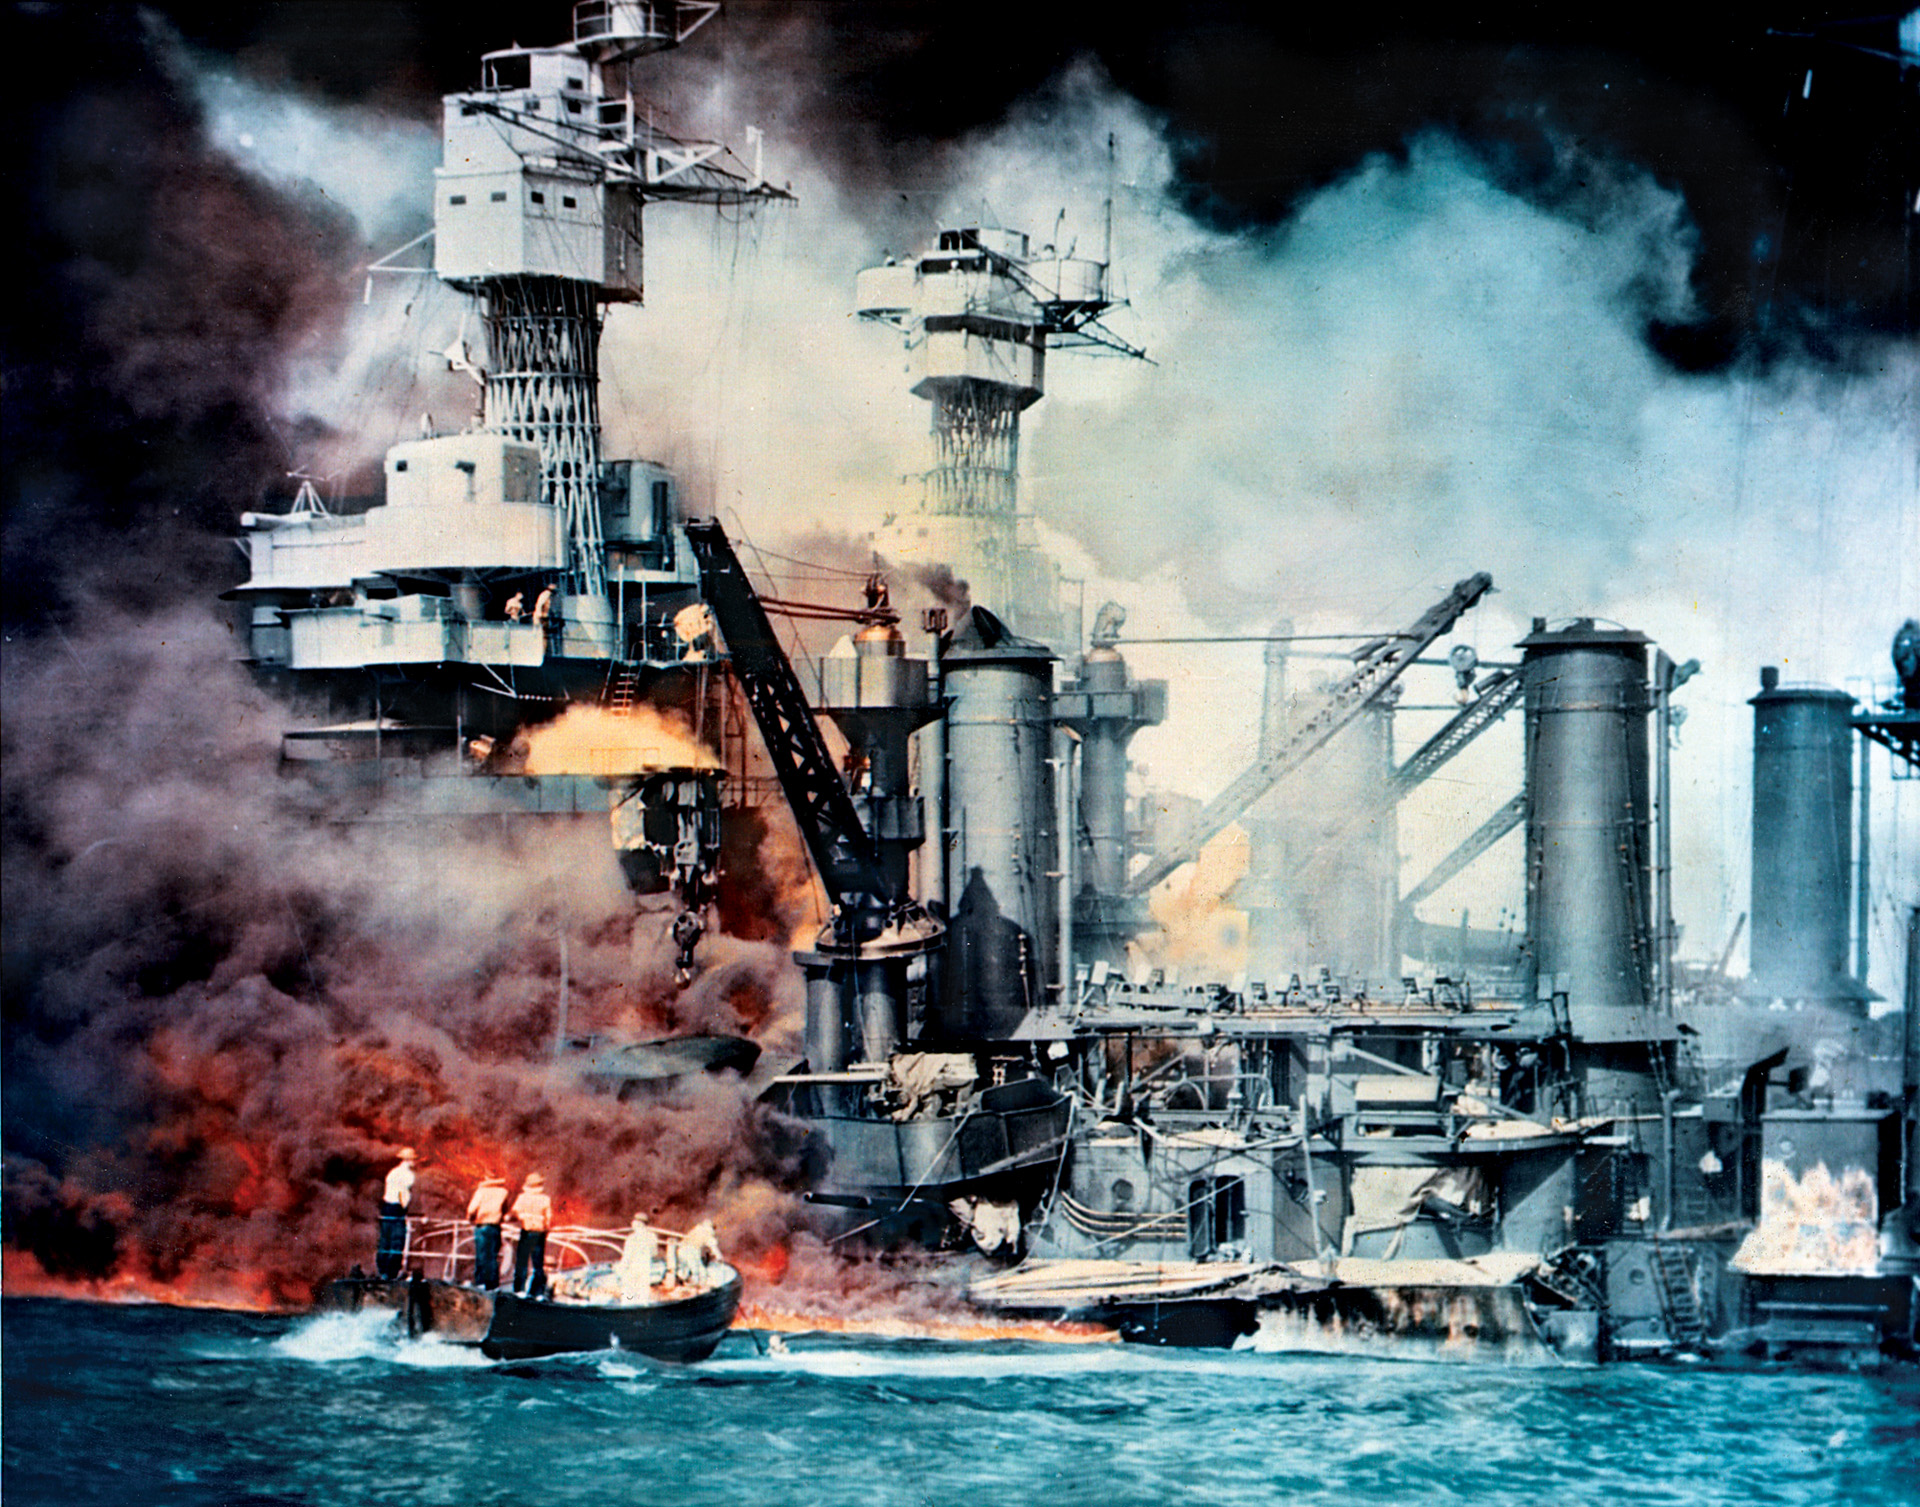 Smoke and flames billow from the stricken battleship USS West Virginia in Pearl Harbor on December 7, 1941.